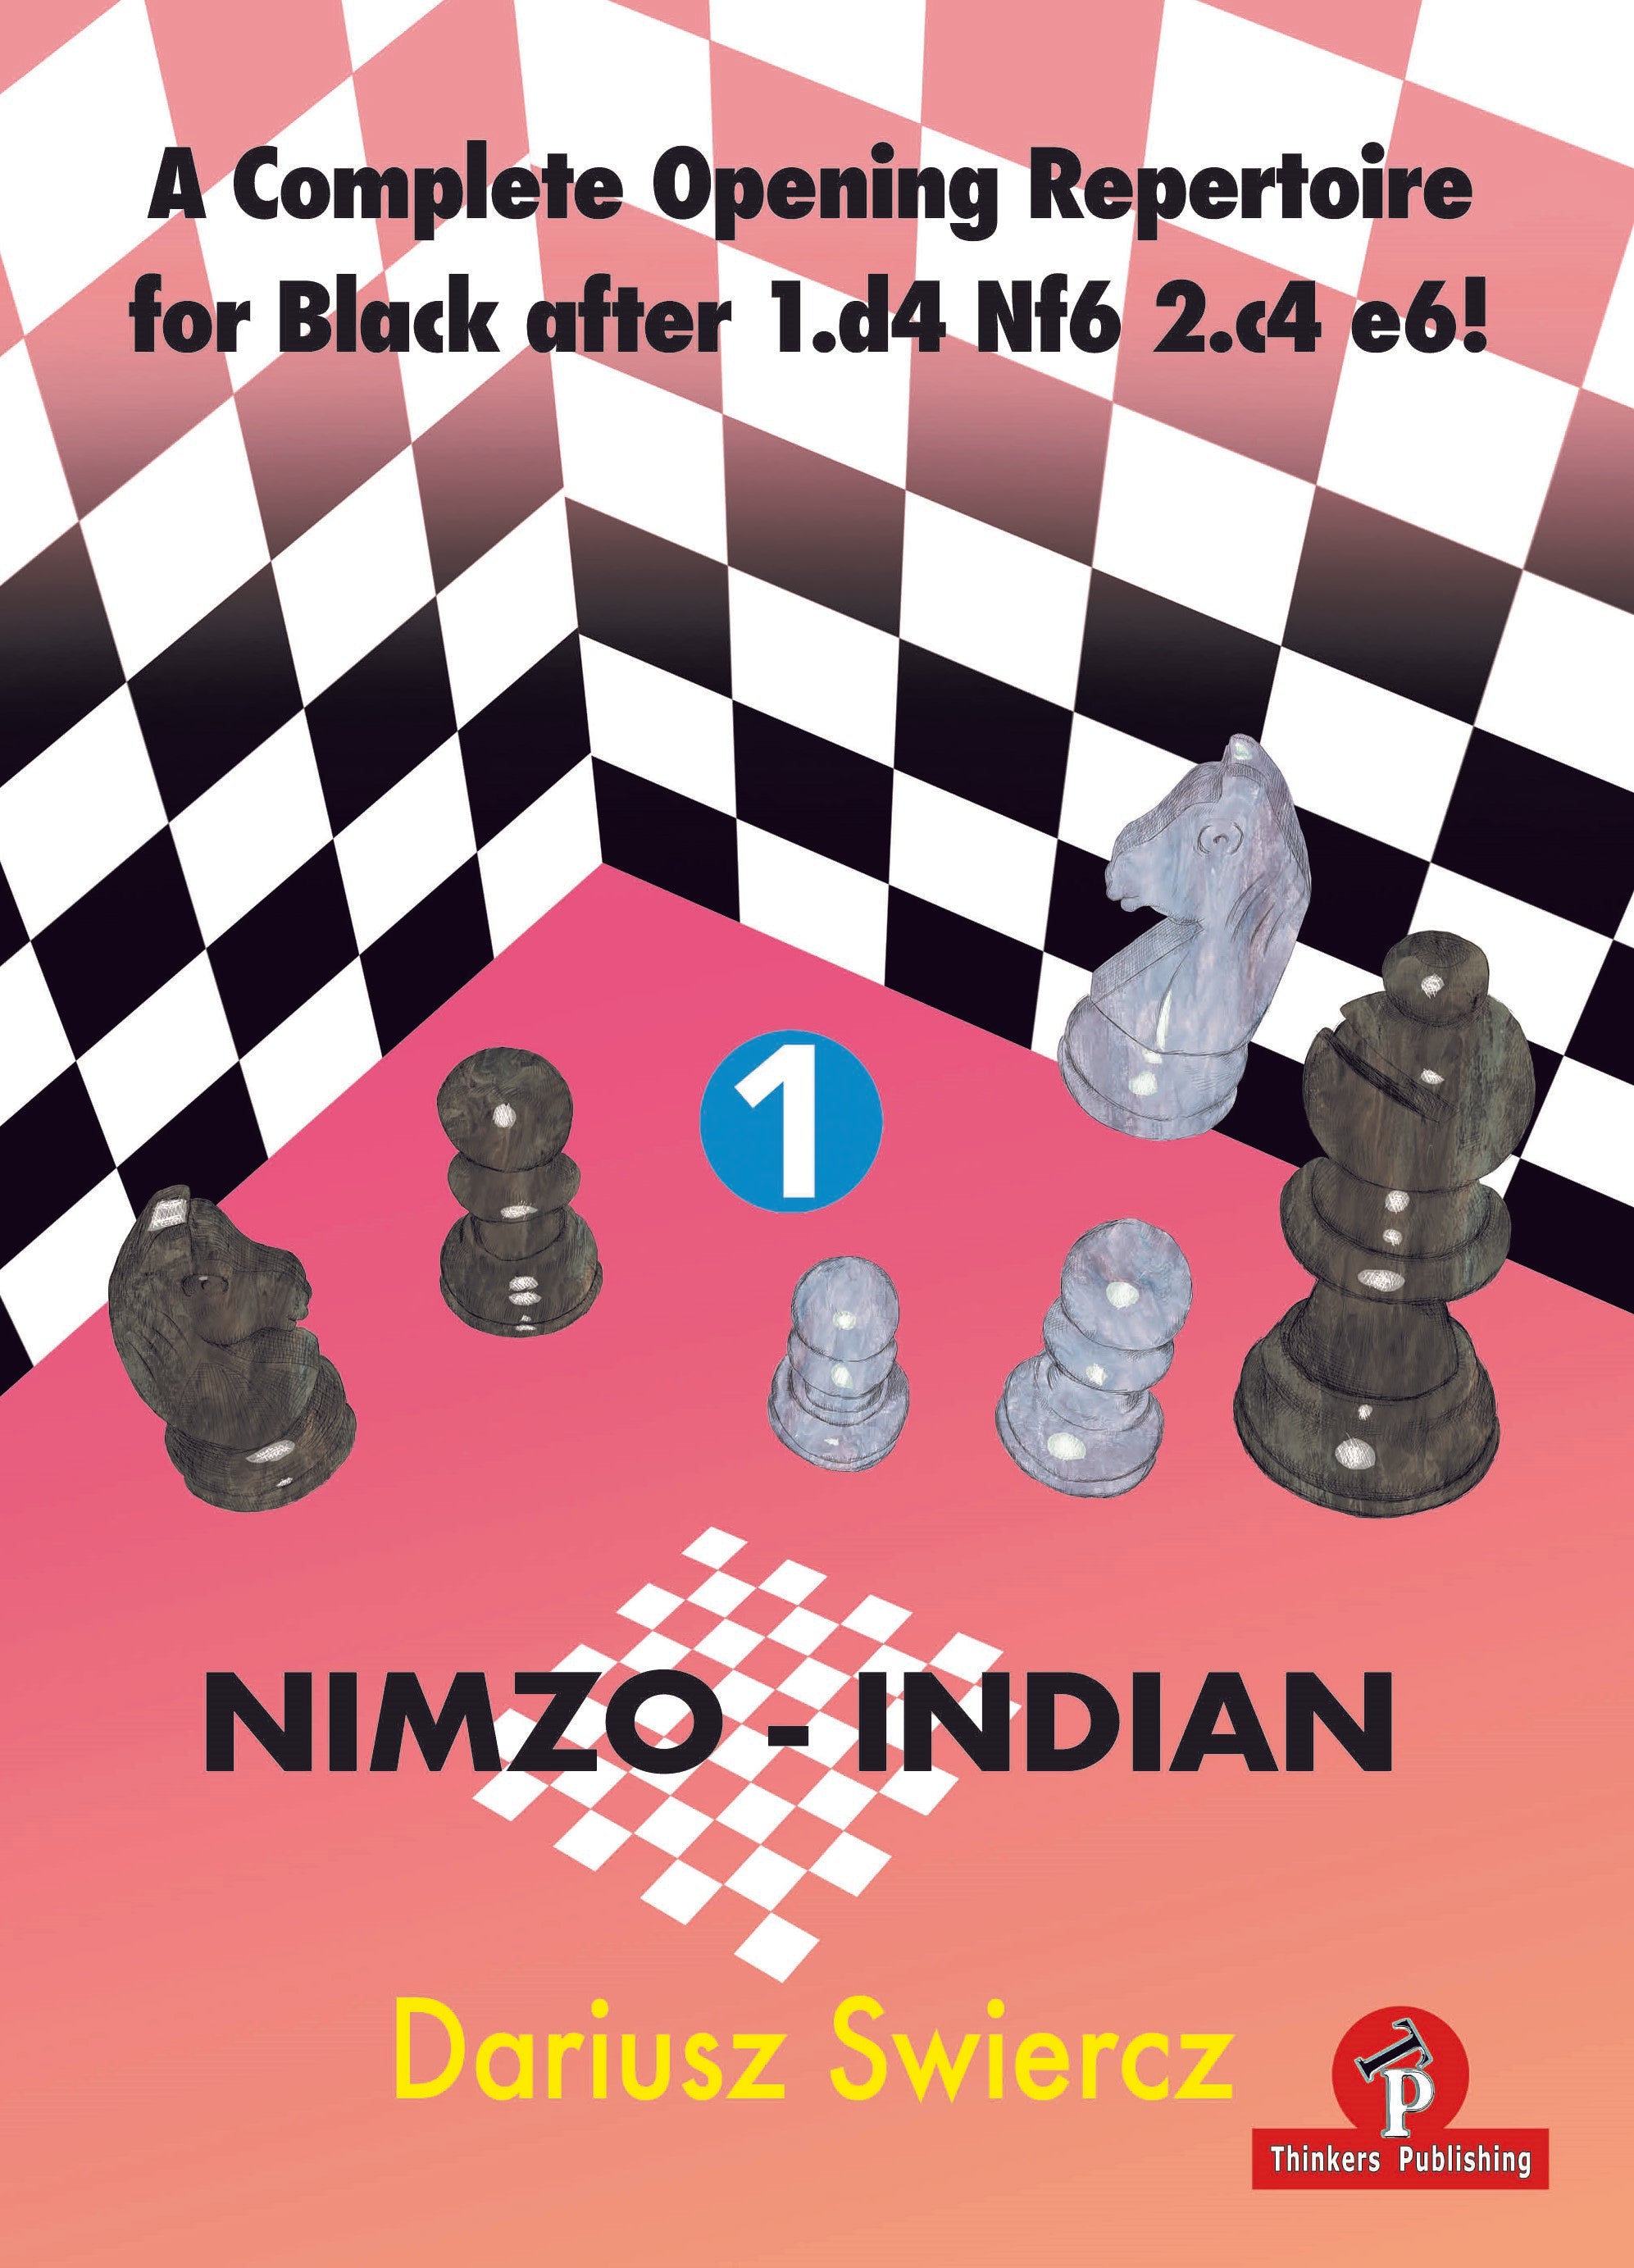 Everyman Chess: The Pirc in Black and White -- Chess Opening